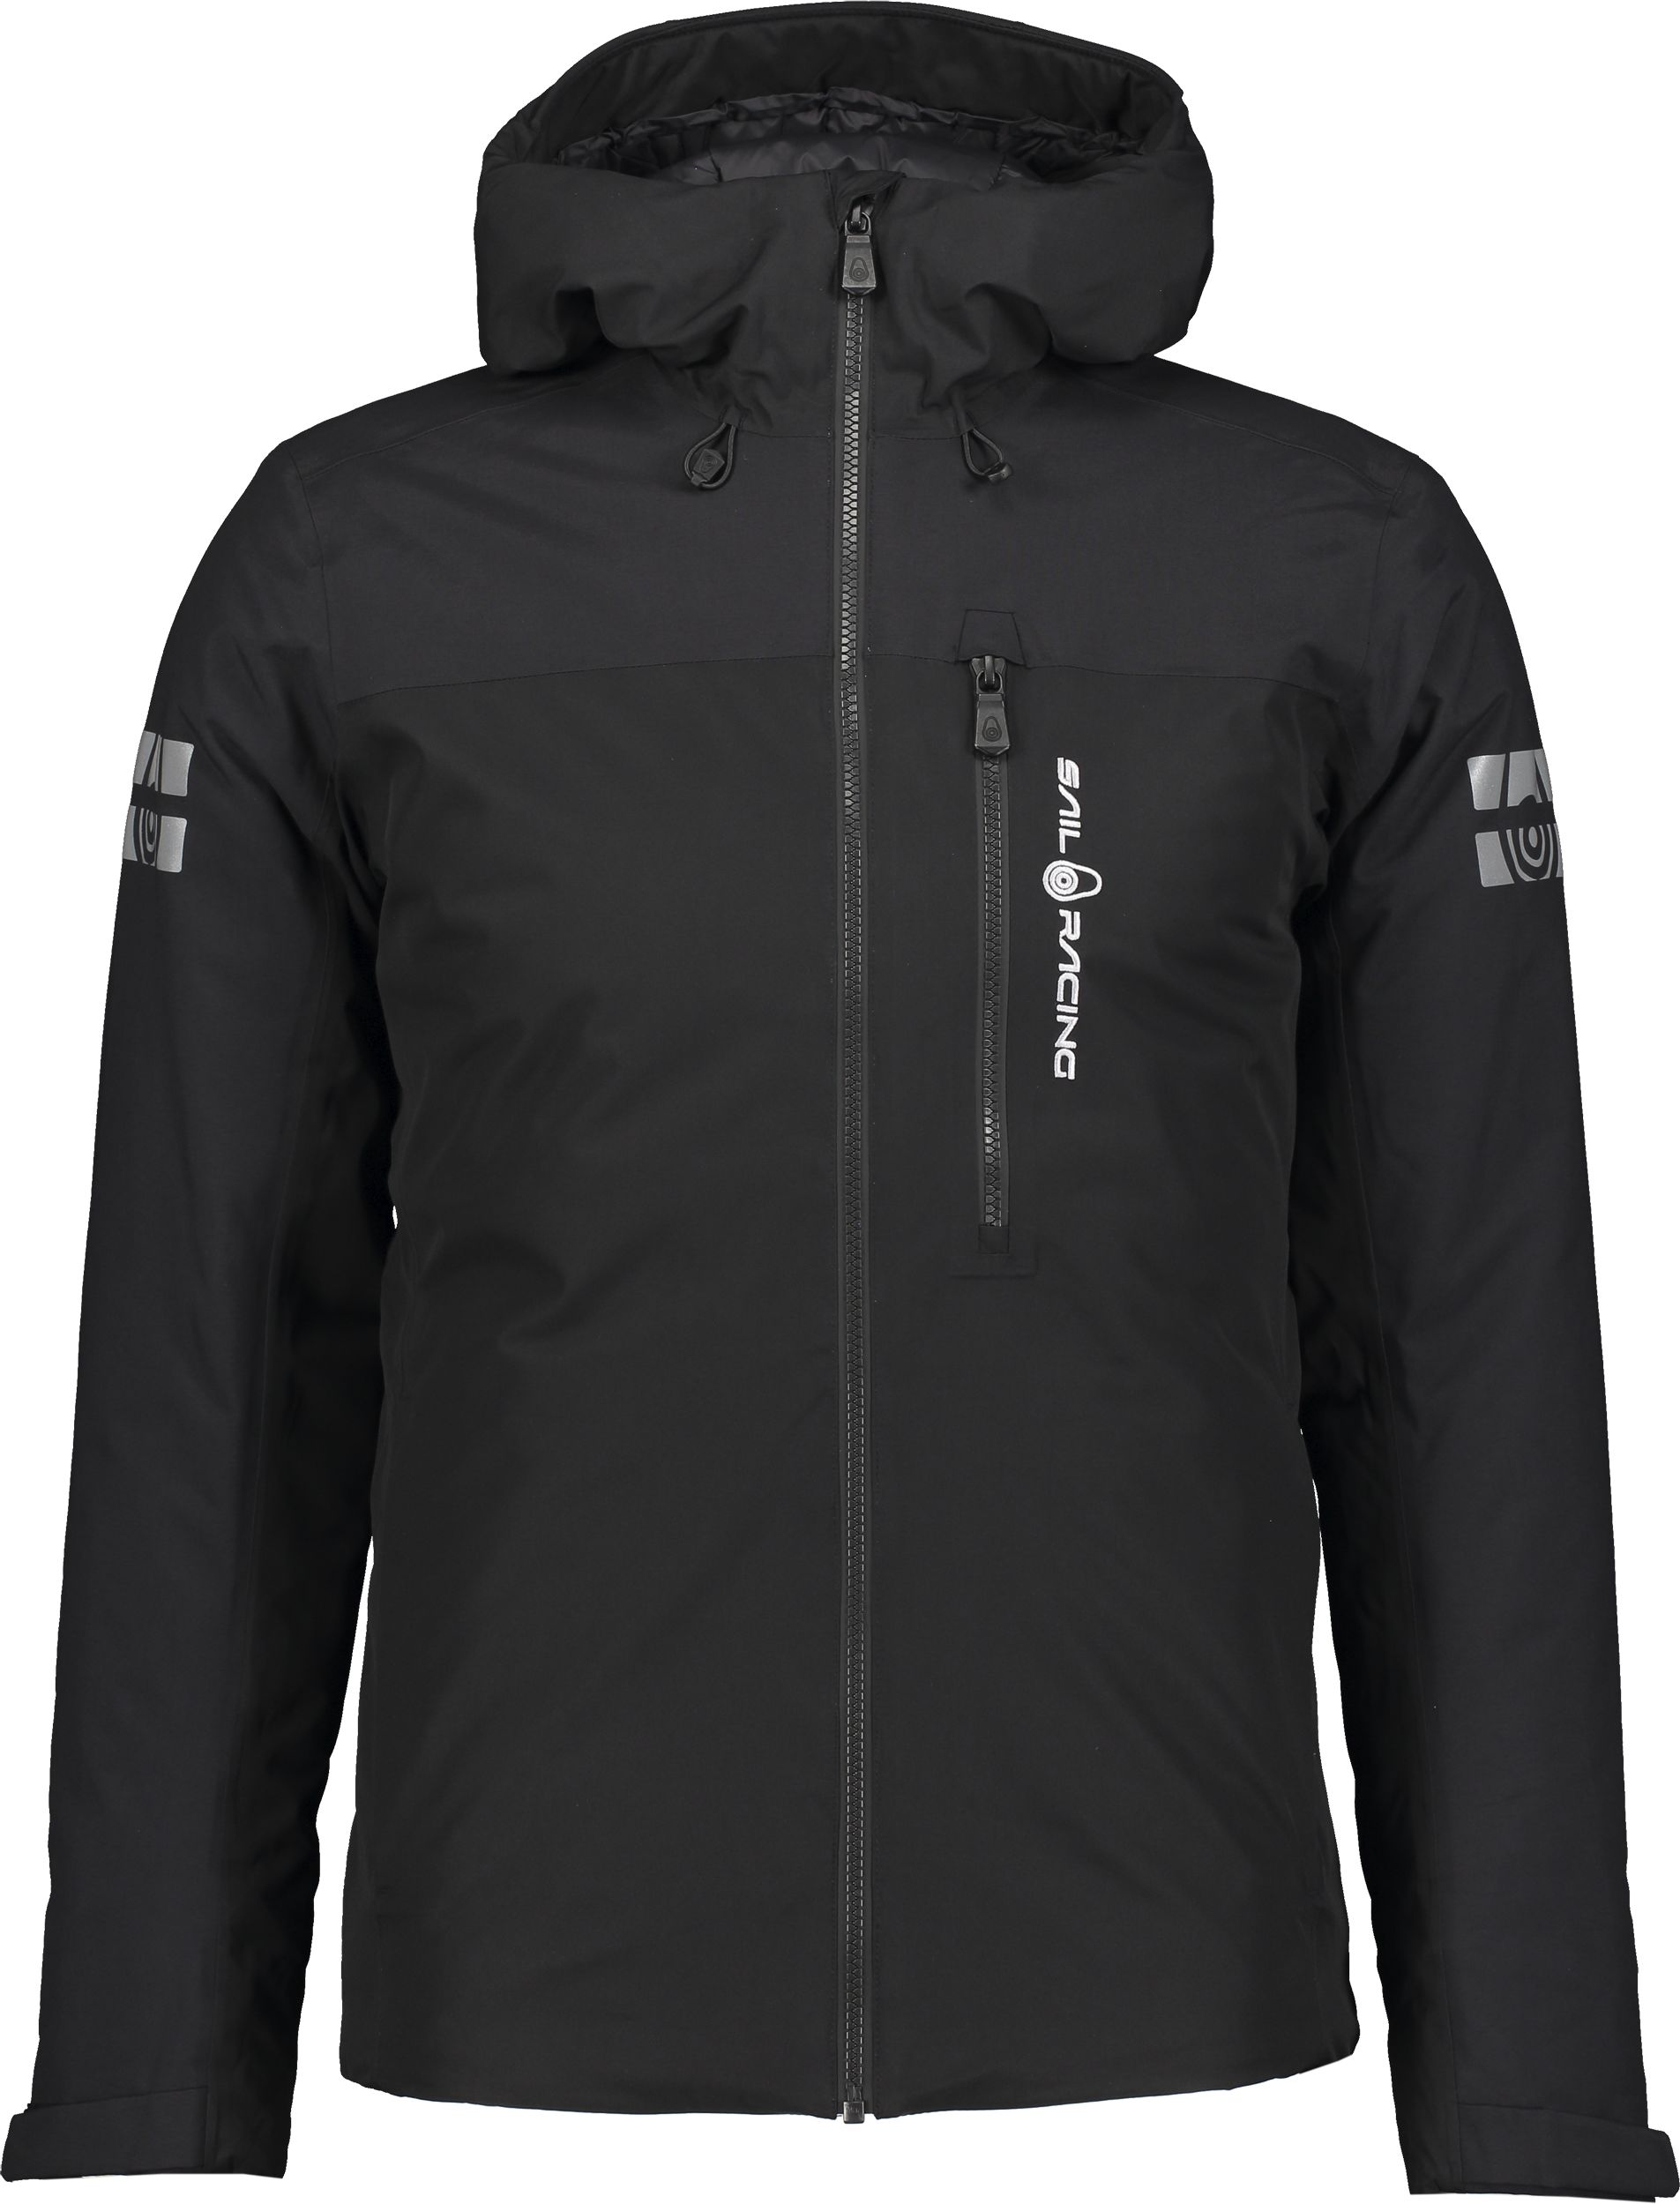 SAIL RACING, M CAPE INSULATED JACKET